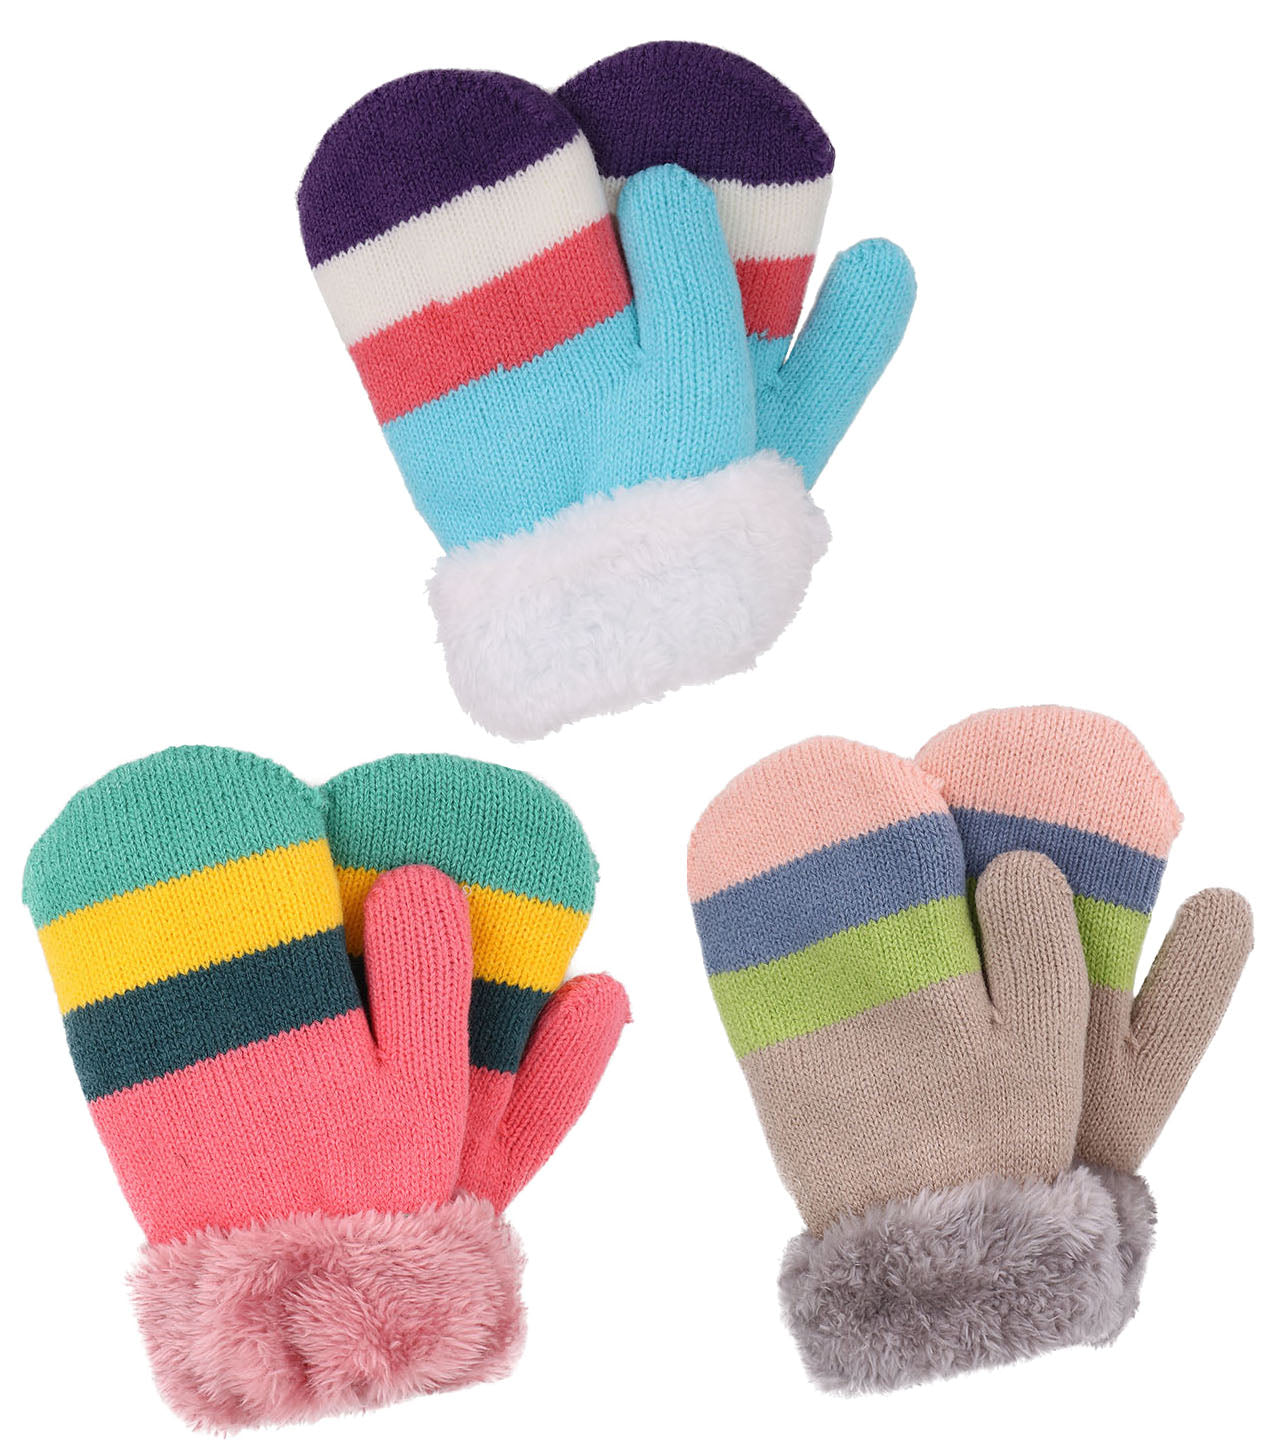 Arctic Paw 3 Pairs Kids' Sherpa Lined Knit Mittens Boys Girls Winter Gloves